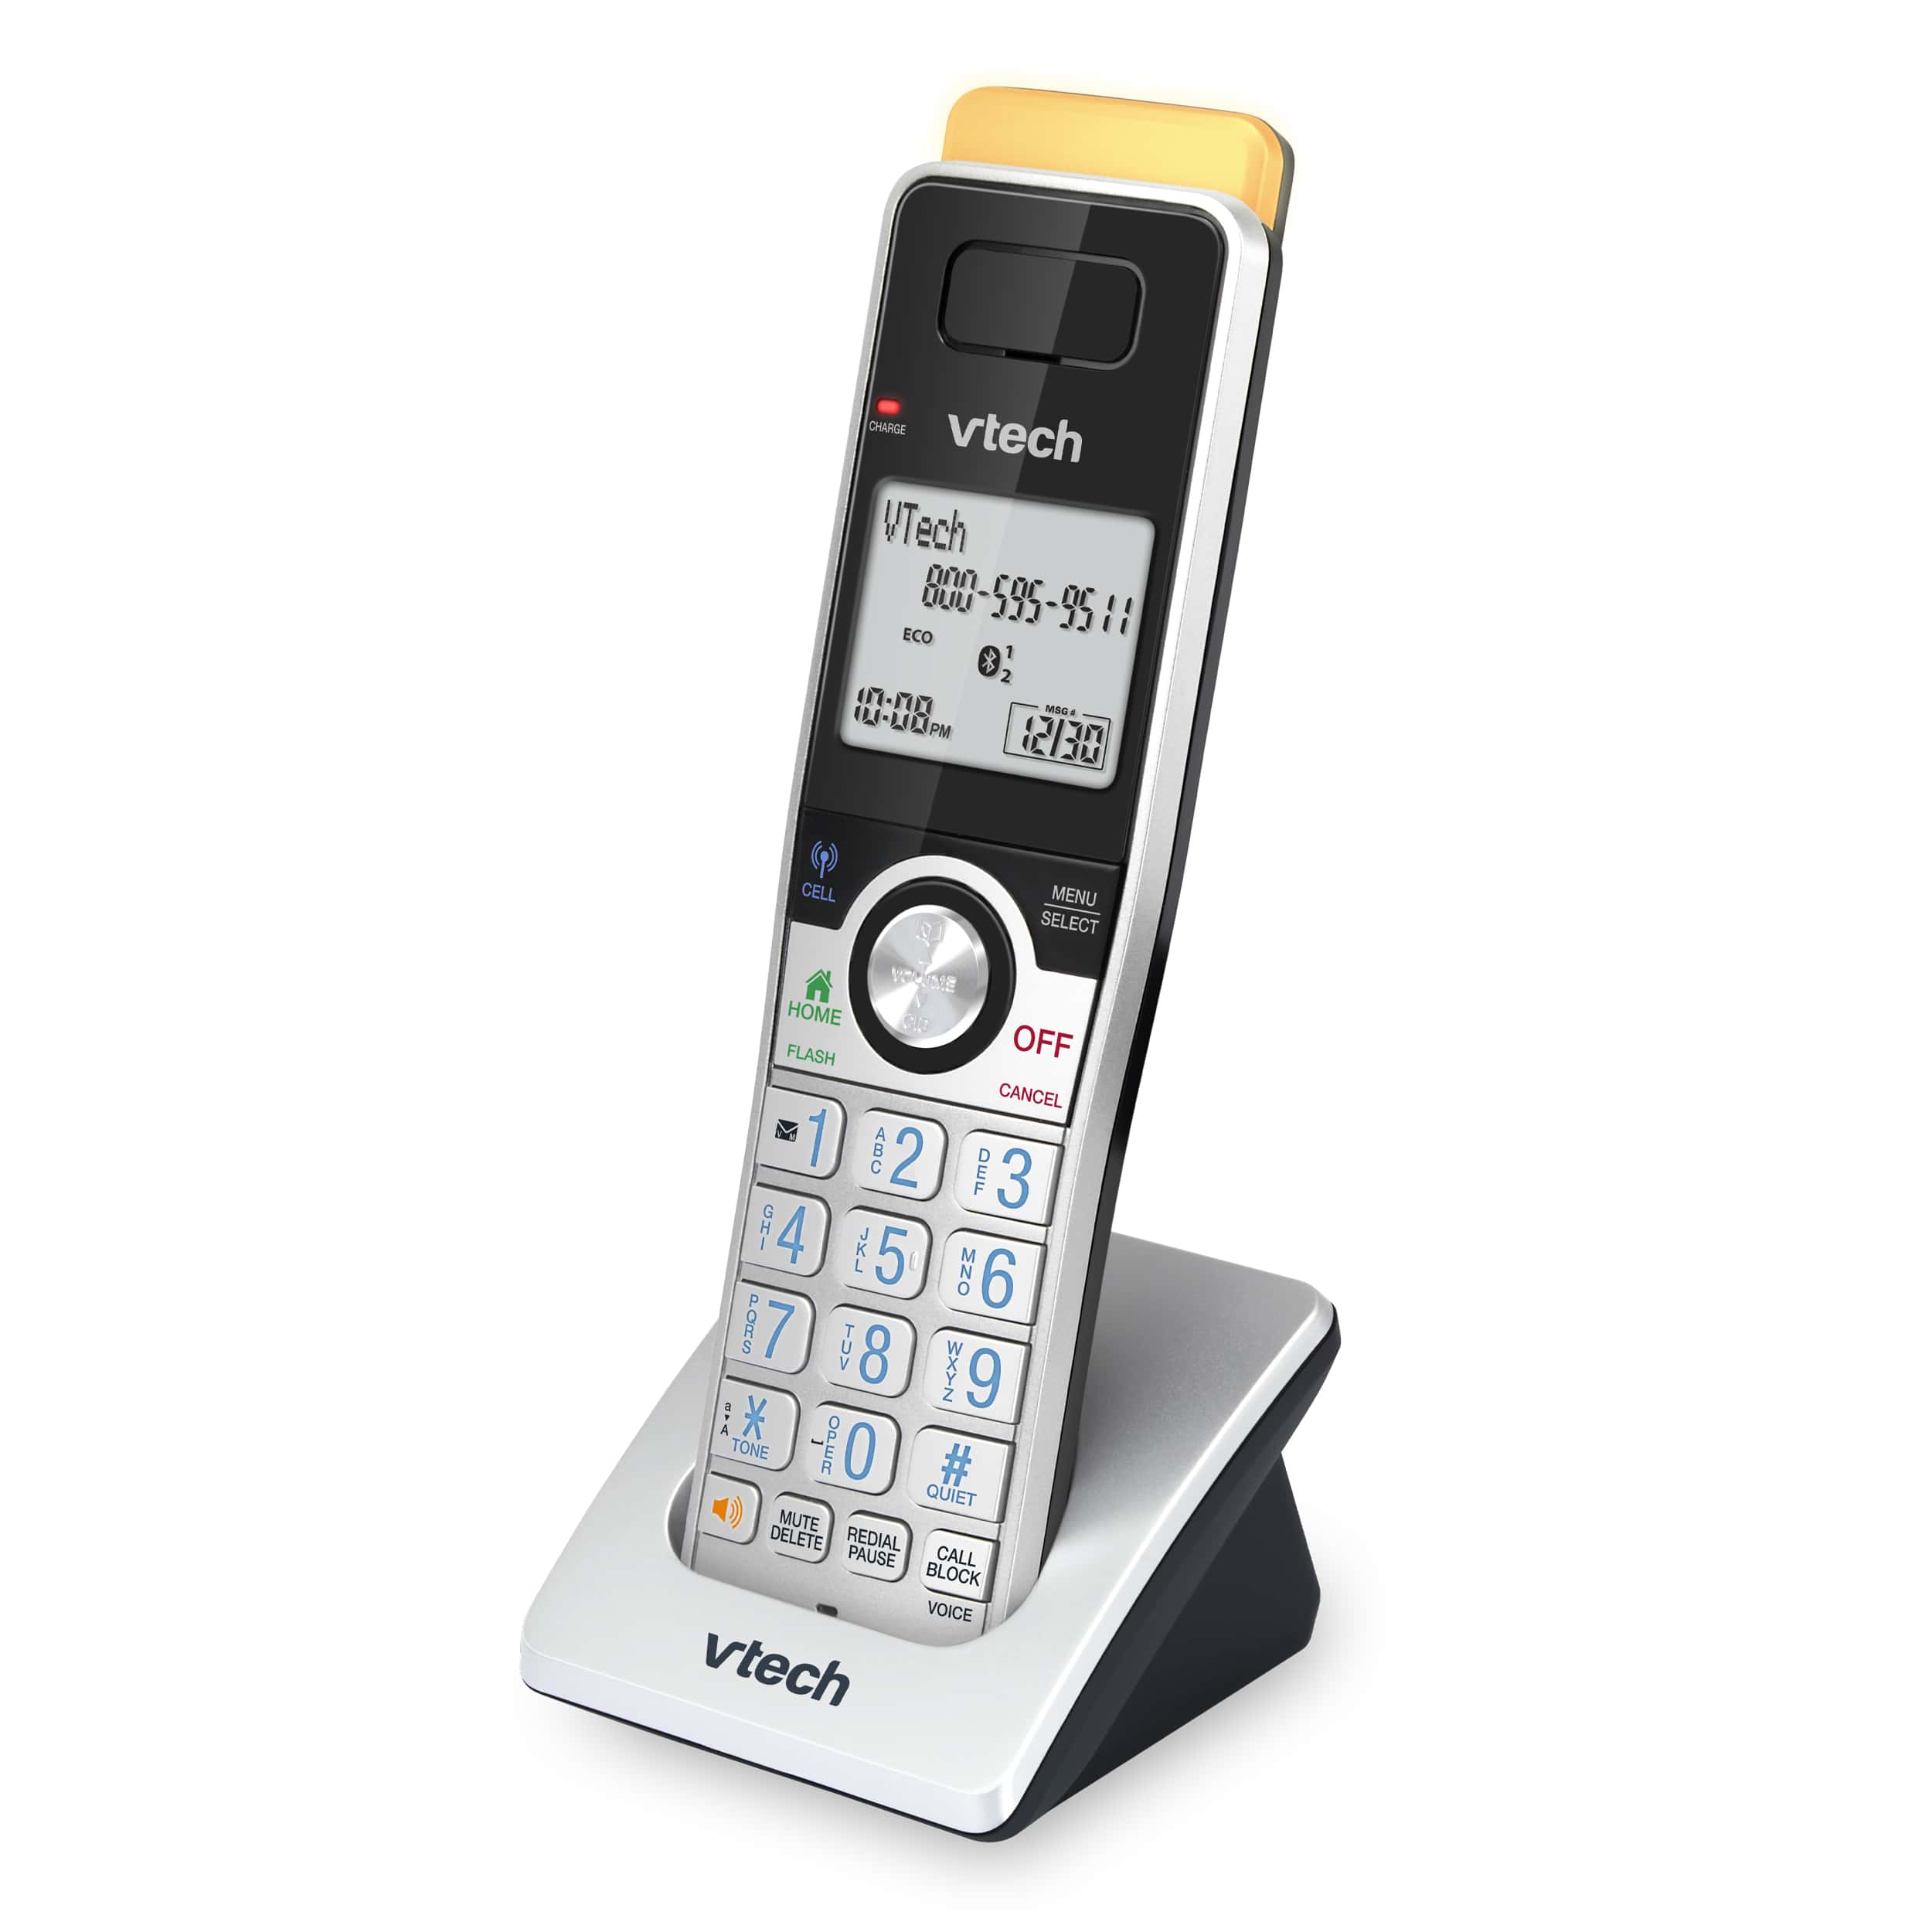 Accessory Handset with Super Long Range, Bluetooth Connect to Cell, and Smart Call Blocker - view 2